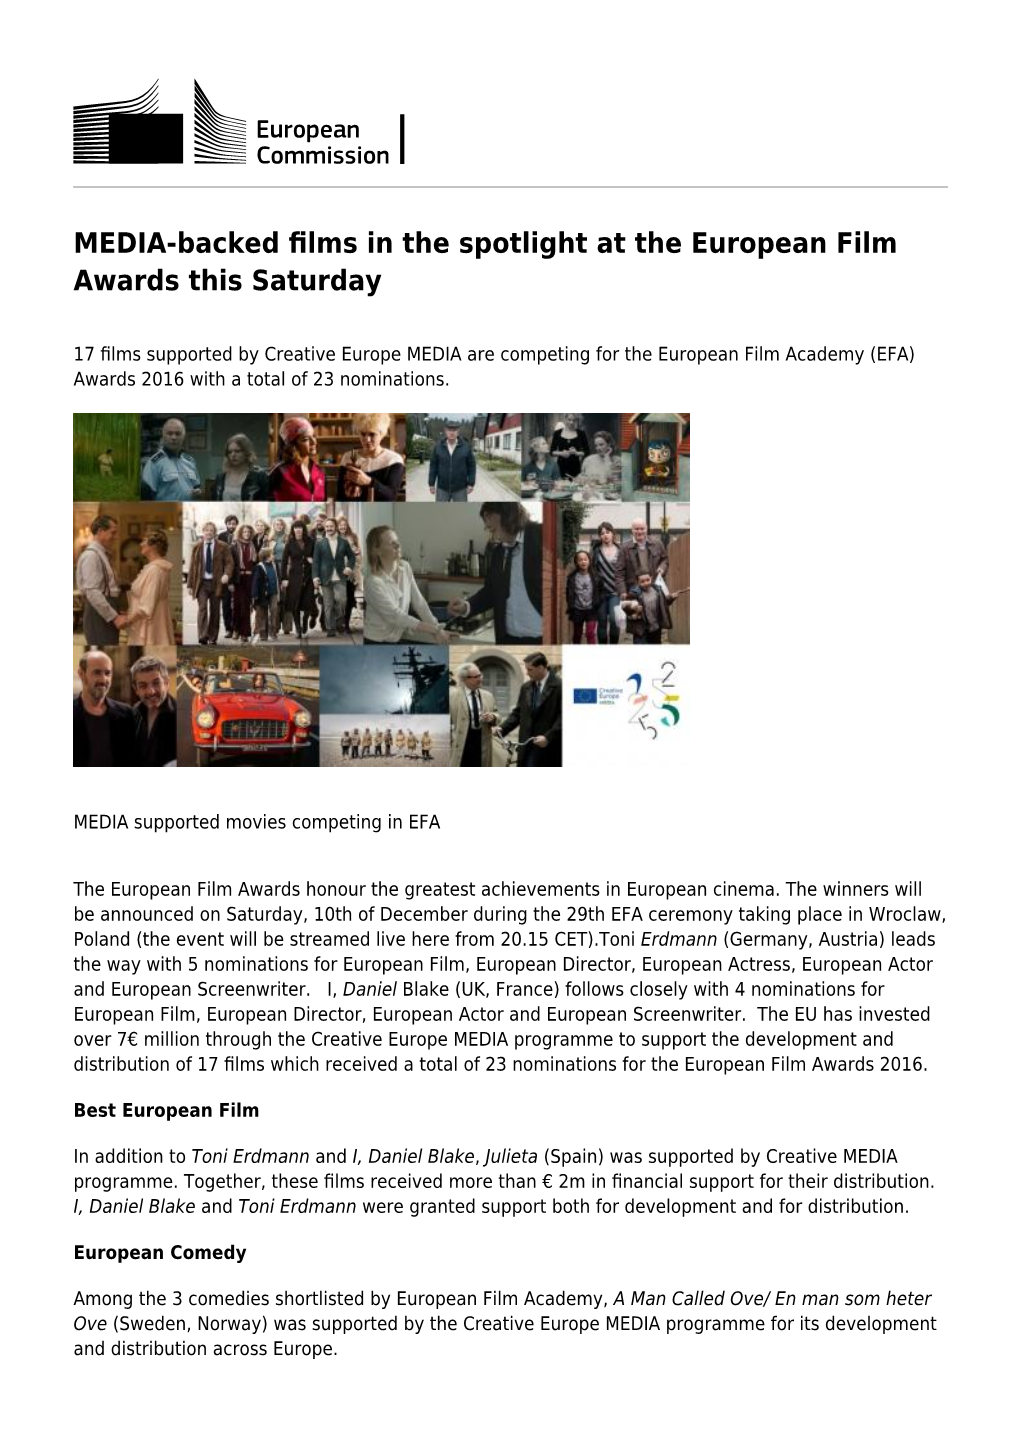 MEDIA-Backed Films in the Spotlight at the European Film Awards This Saturday